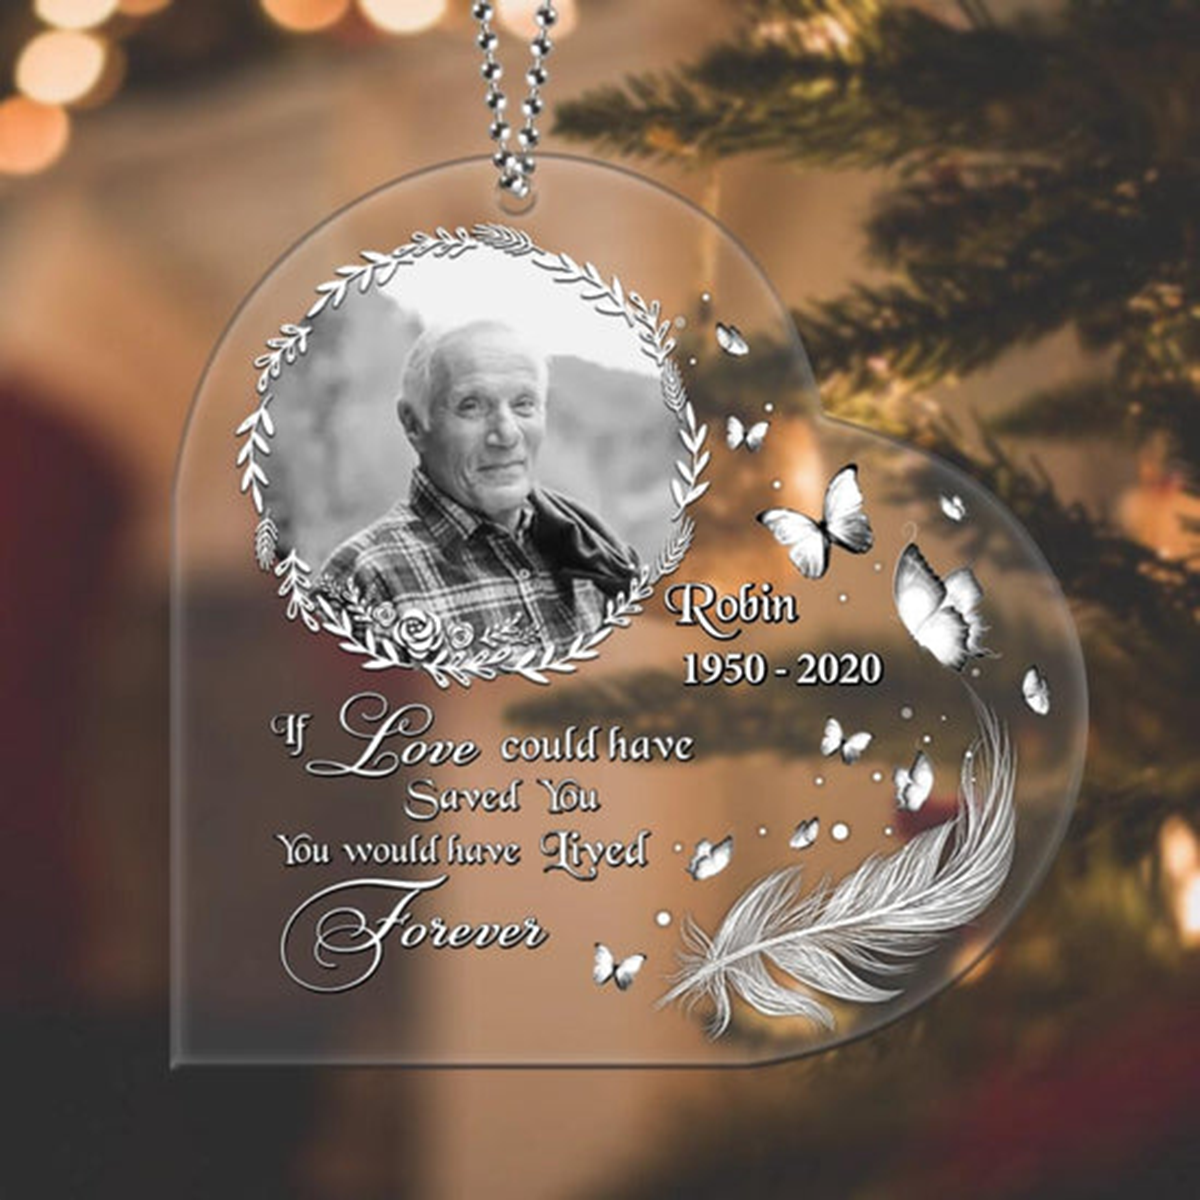 Personalized Memorial Photo Heart Acrylic Ornament, If Love Could Have Saved You You Would Have Lived Forever Ornament, Memorial Gift Idea For Christmas, Family